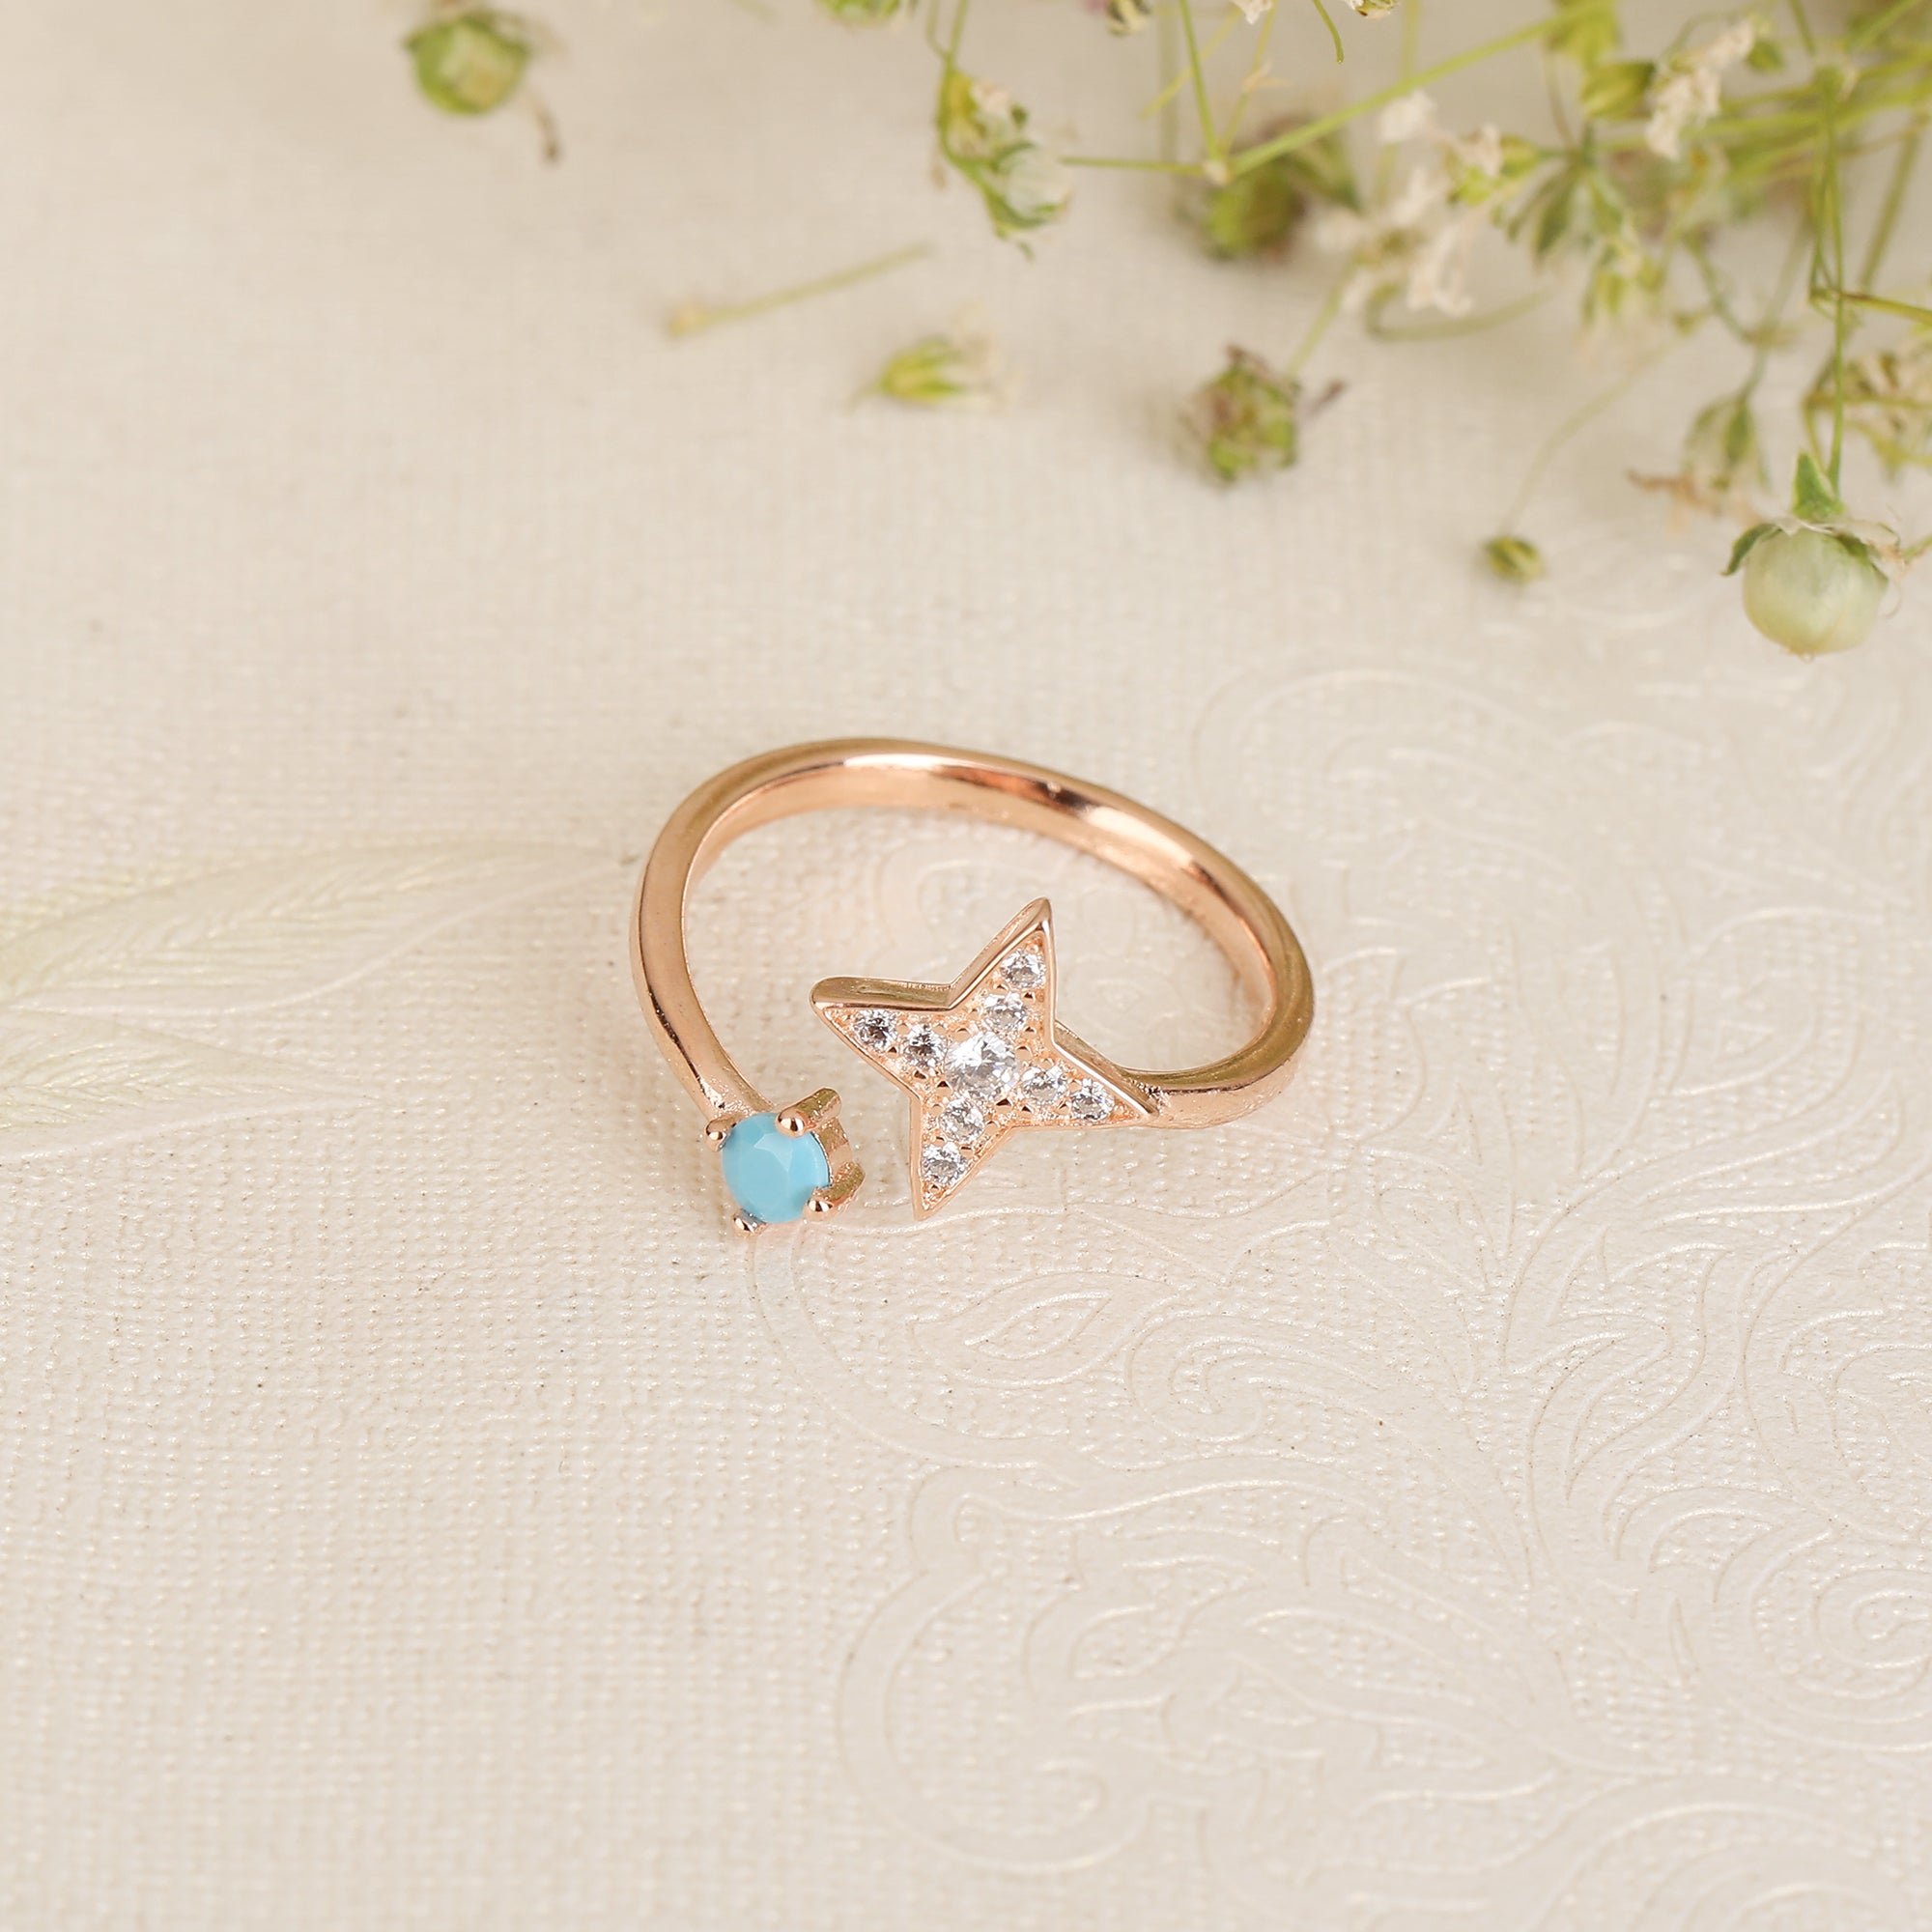 Rose gold star ring with adjustable size